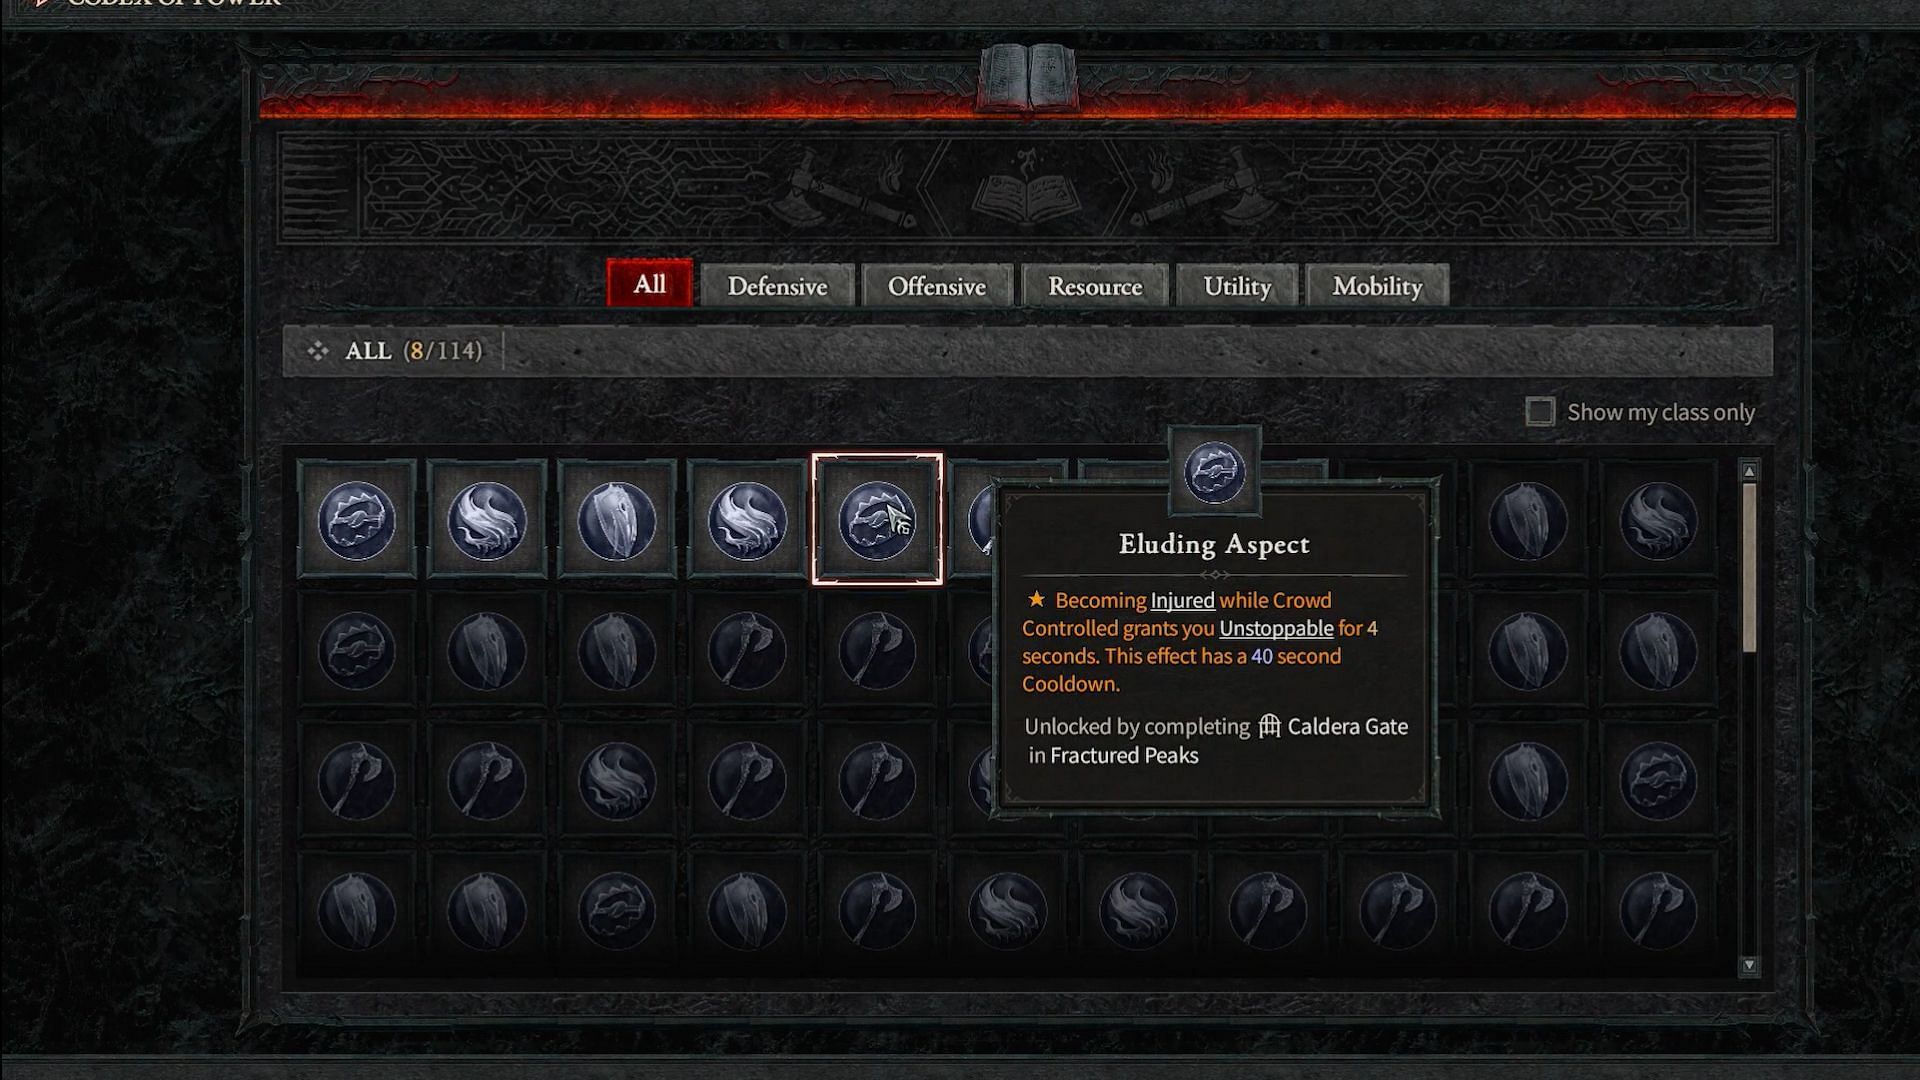 Eluding Aspect can be used to leverage Injured debuff (Image via Blizzard Entertainment)